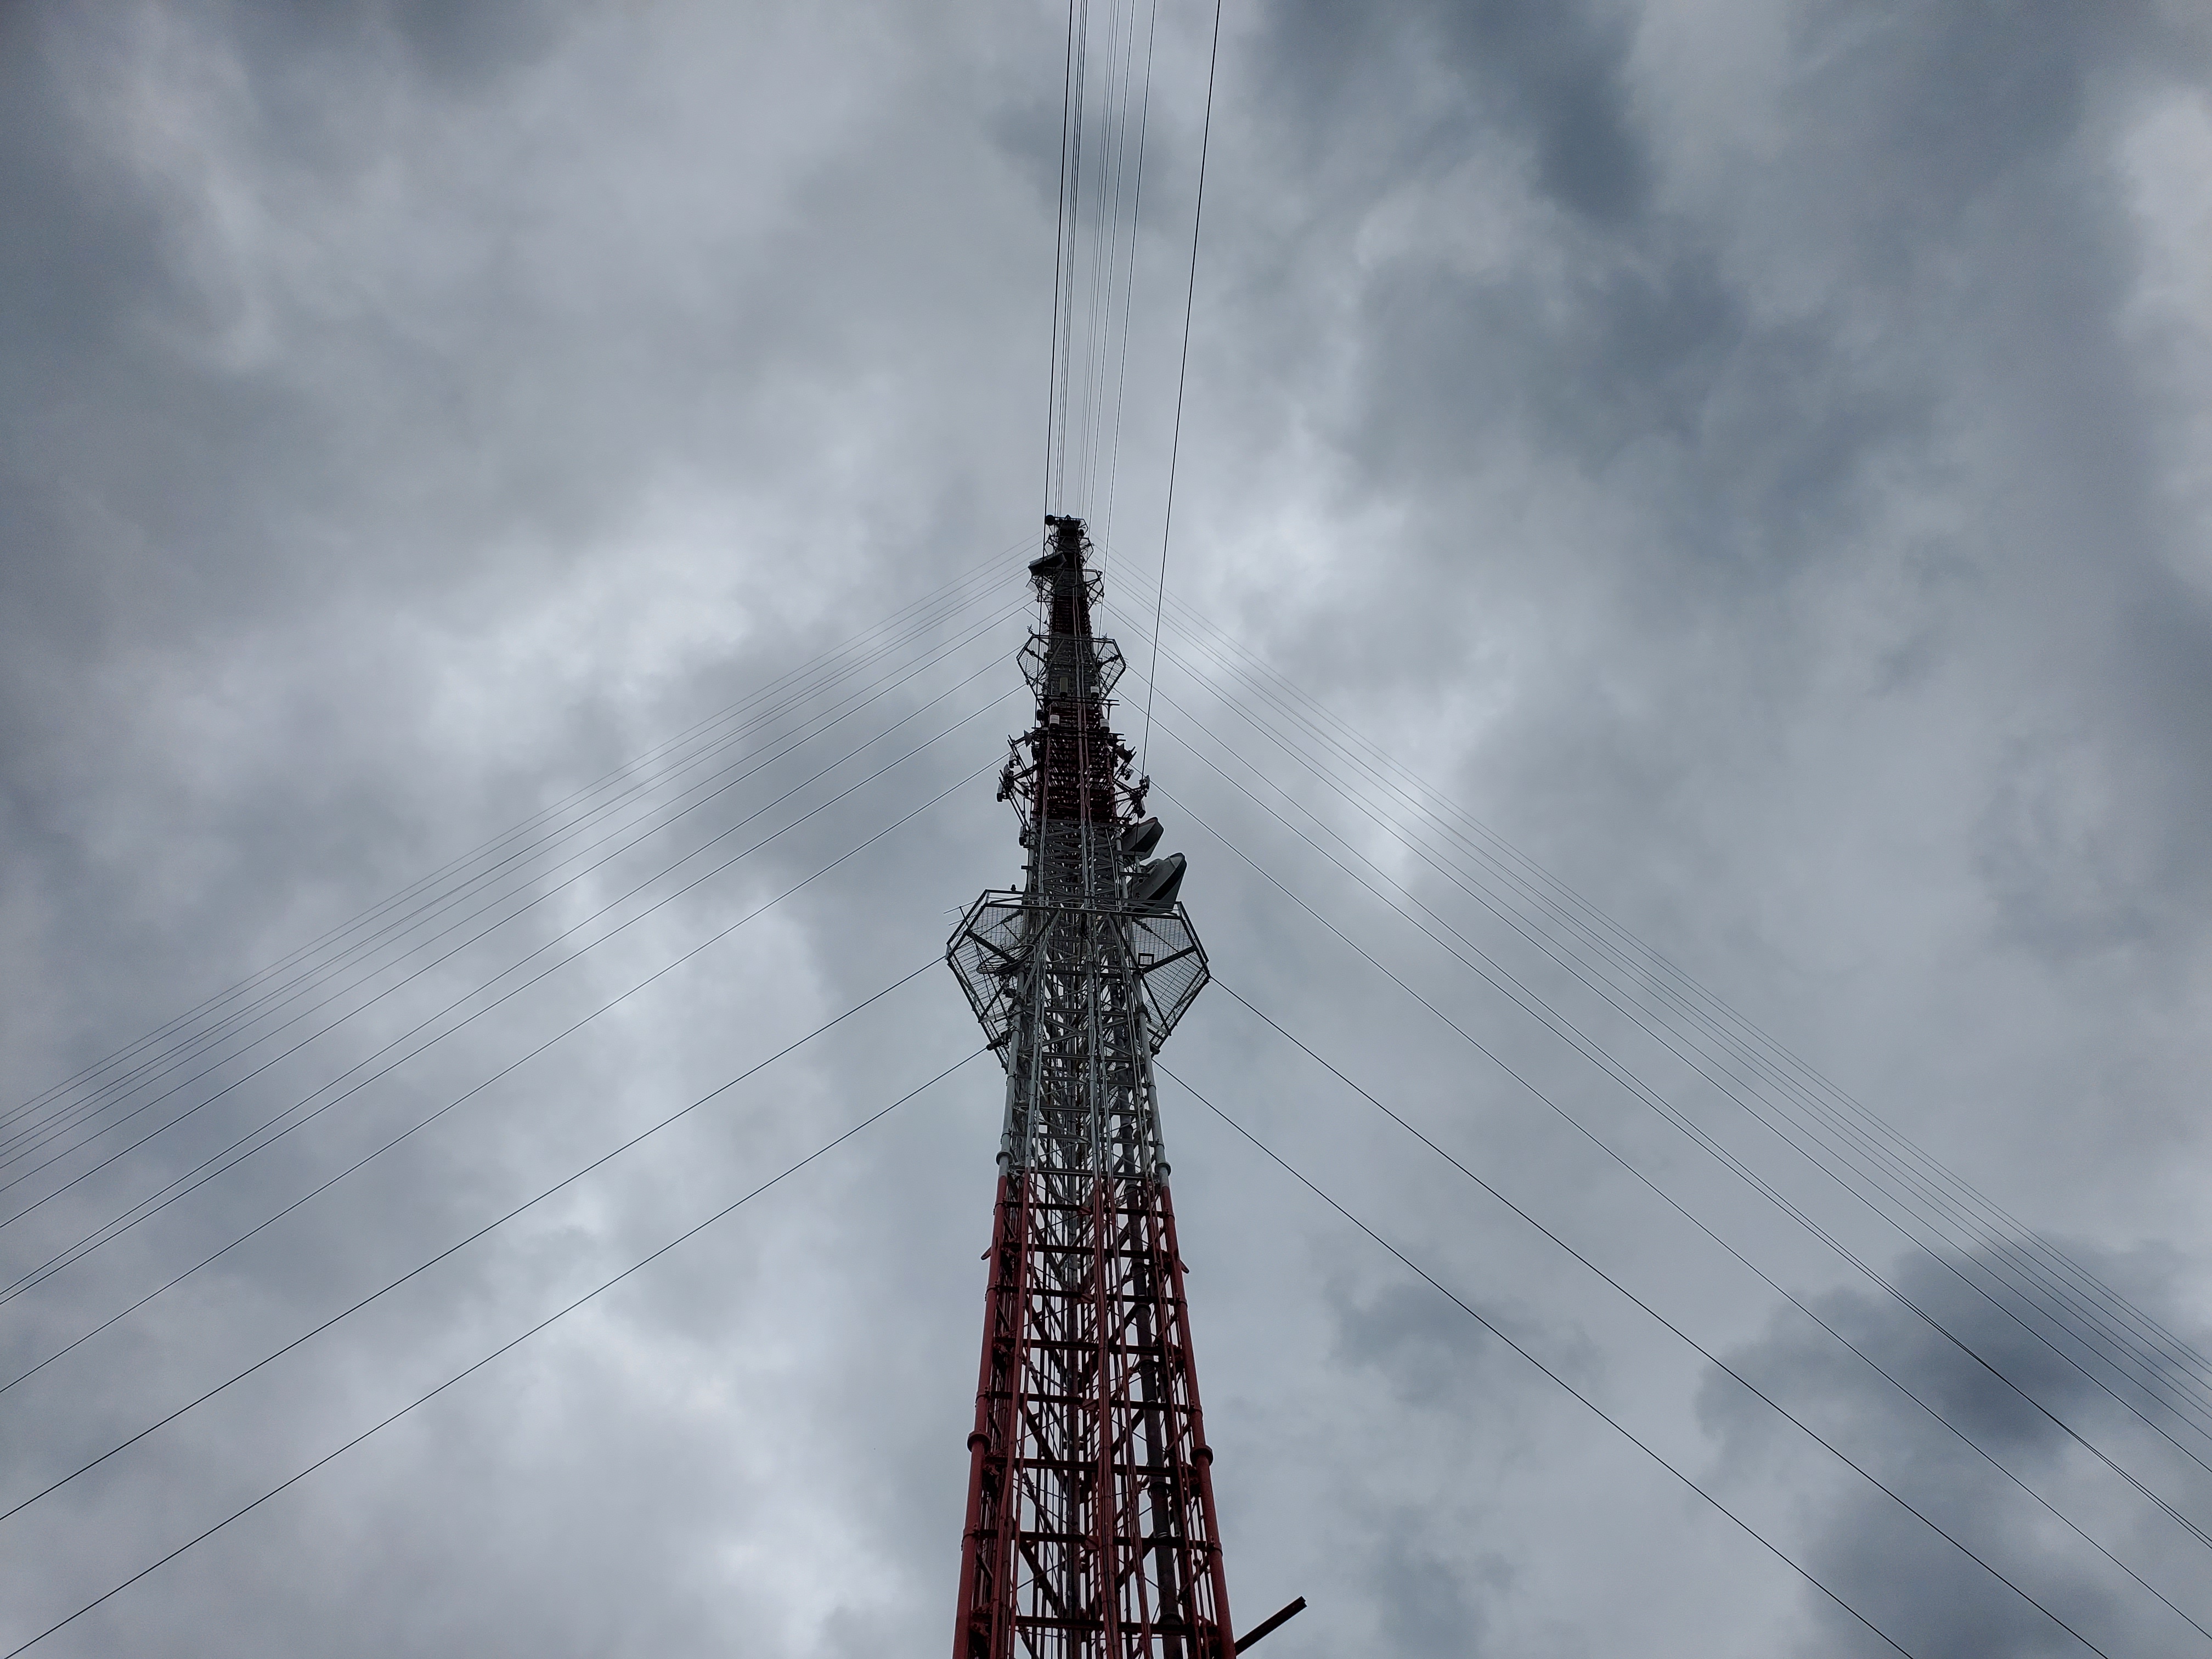 A picture of the WPRB Broadcast tower, taken during a cloudy day. We broadcast a (sometimes very questionable) wide variety of music from here. 